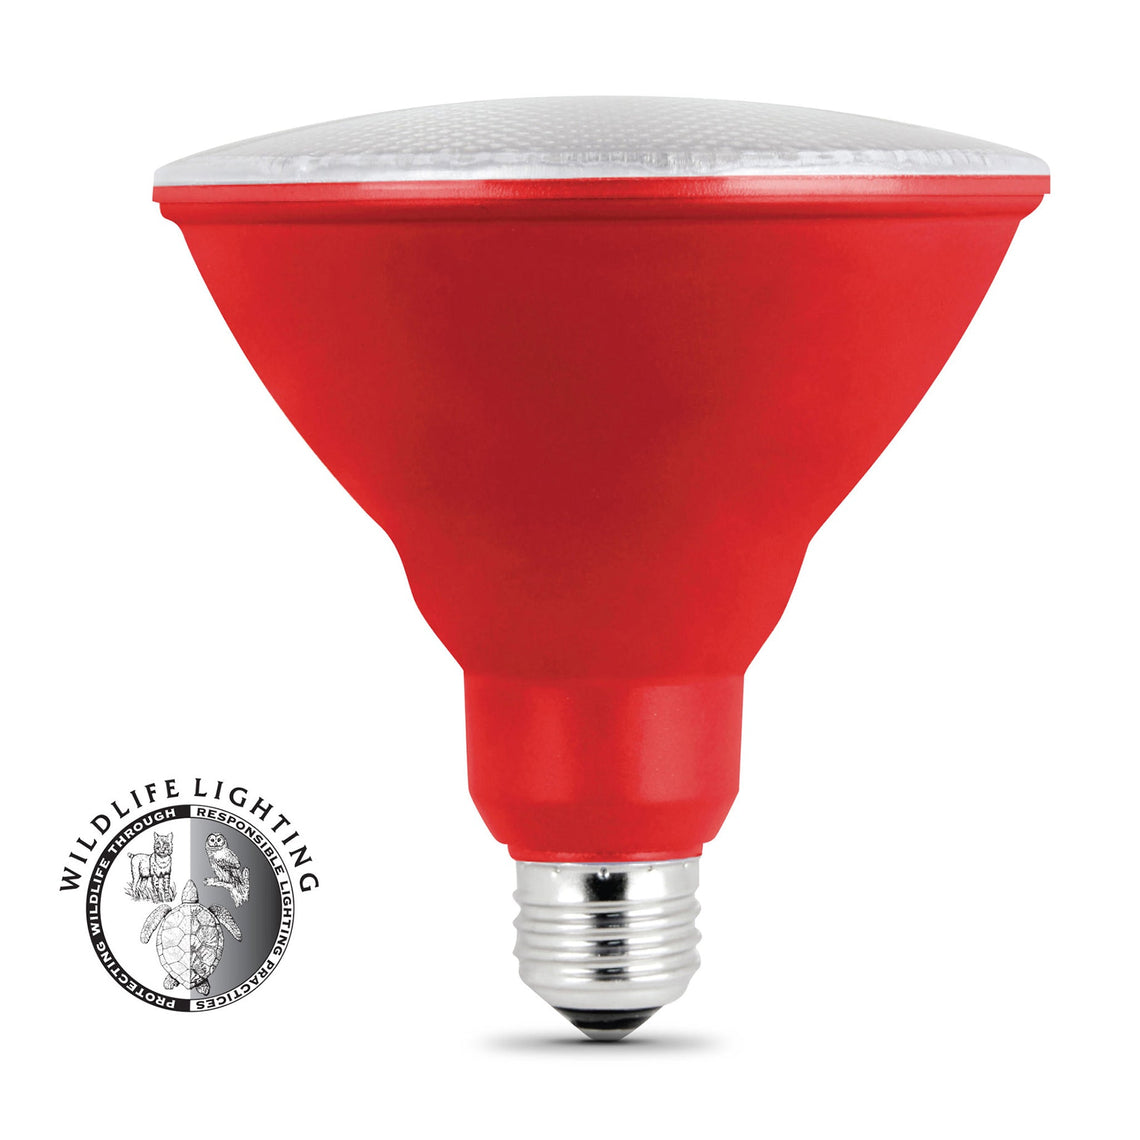 PAR38 Red LED Light Bulb, 5 Watts, E26, Weatherproof, Red Reflector, Party and Decorative Lighting